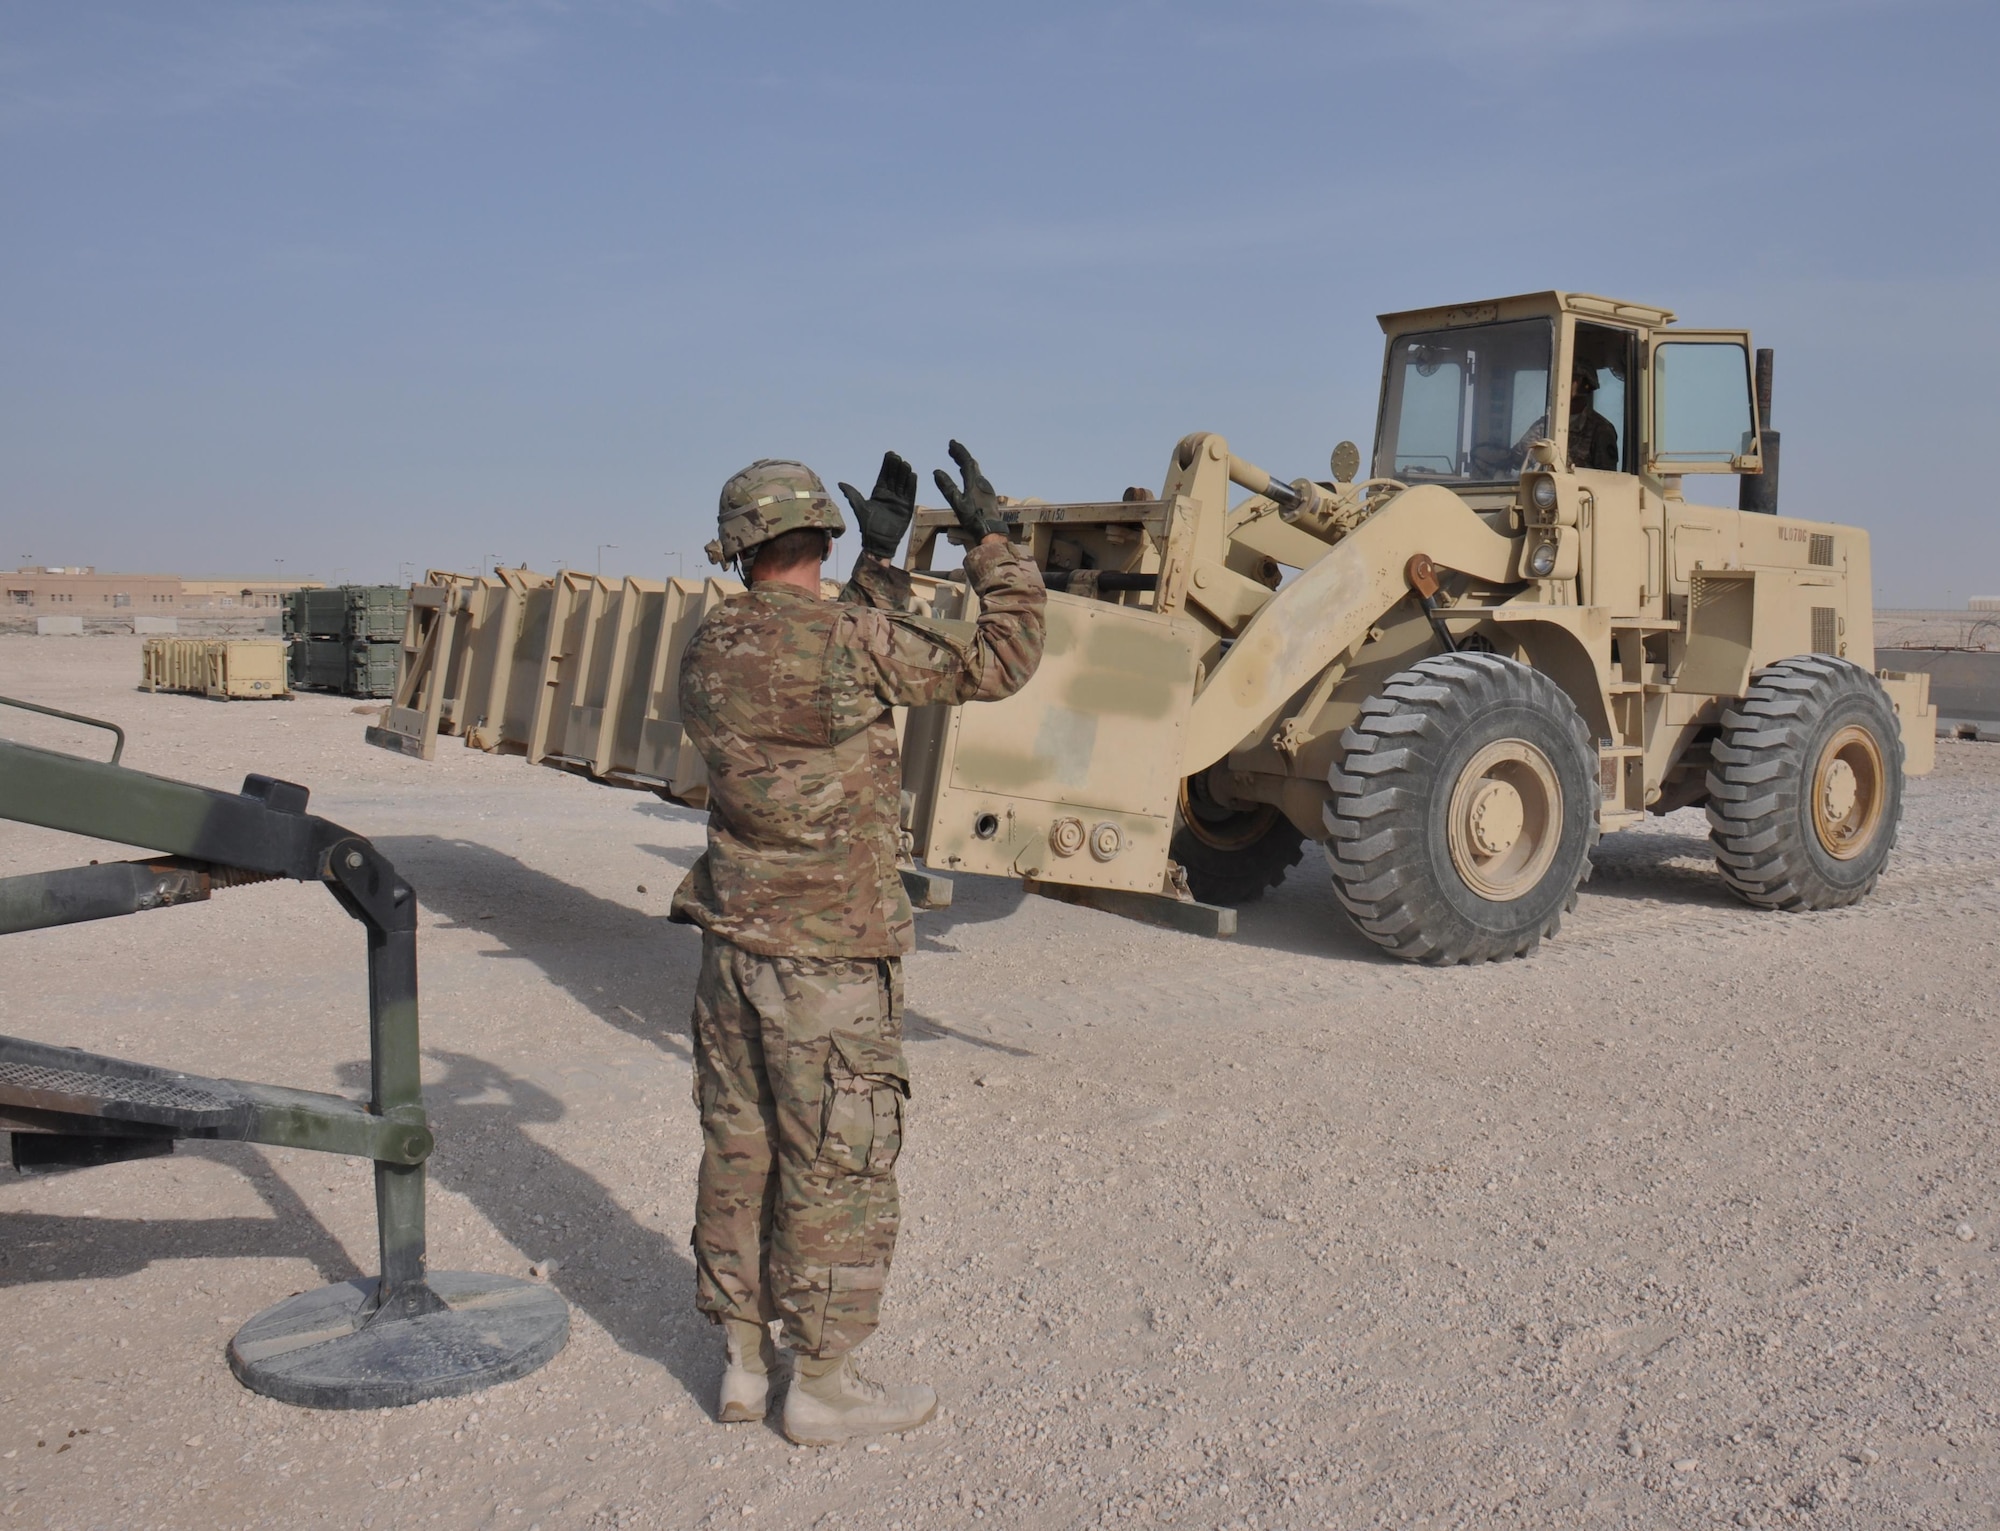 Spc. Peter Clark, 1-62 Delta Battery Air Defense Artillery Regiment Patriot station launcher operator and maintainer from Kittery, Maine, guides a forklift operated by Pfc. Brandon Long, 1-62 Delta Battery ADA Regiment Patriot station launcher operator and maintainer from Montgomery, Alabama, into position during a missile reloading training exercise at Al Udeid Air Base, Qatar Mar. 4. The Patriot missiles at AUAB protect the base from a variety of airborne threats including tactical ballistic missiles and drones.  (U.S. Air Force photo by Tech. Sgt. James Hodgman/Released)